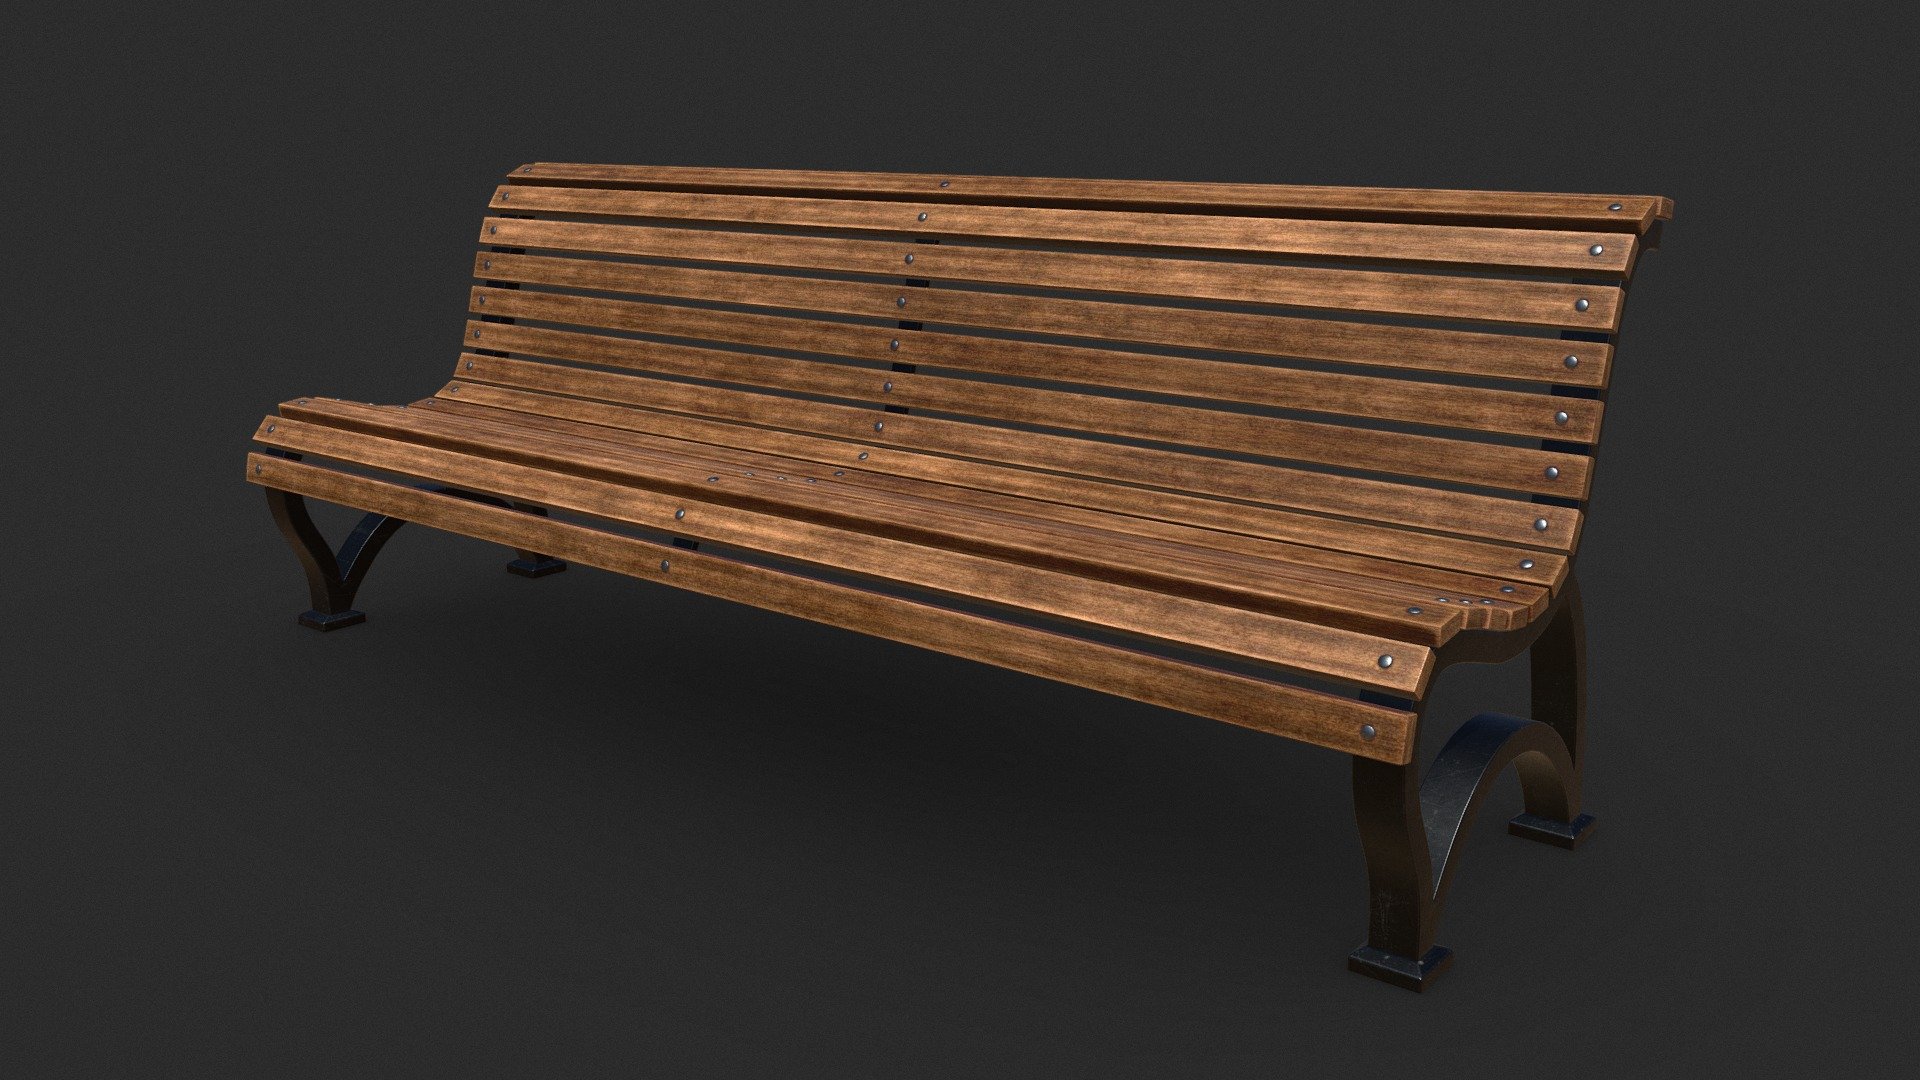 Public bench PBR 3D model. Generic design which can be seen on streets, at parks, stations and other public places. Created as game asset for real-time engines, but works great for architectural renders as well.

Just one combined object and a single material.

Unity package included 3d model